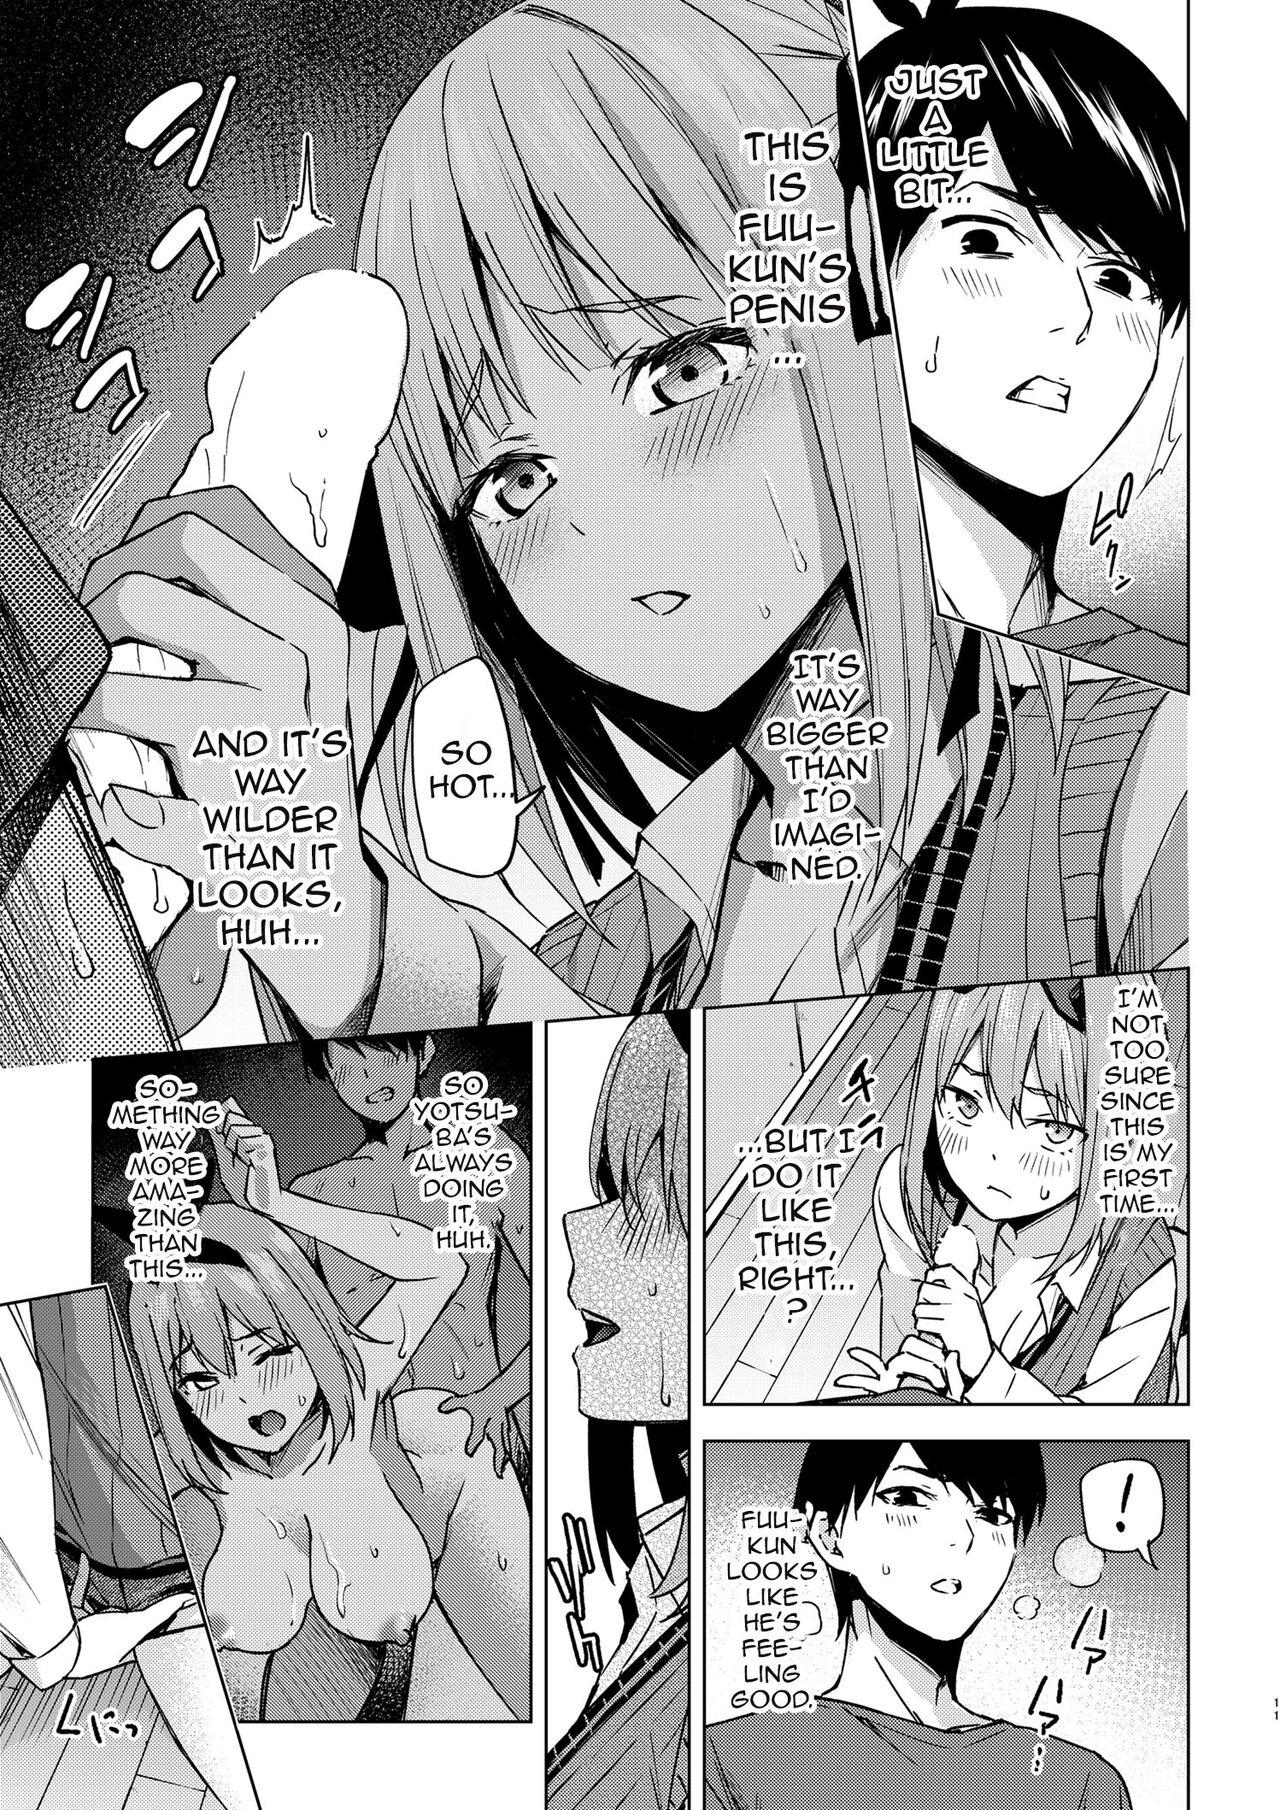 Busty Ichinengo no Itazura | Fooling Around, One Year Later - Gotoubun no hanayome | the quintessential quintuplets Free Fucking - Page 10